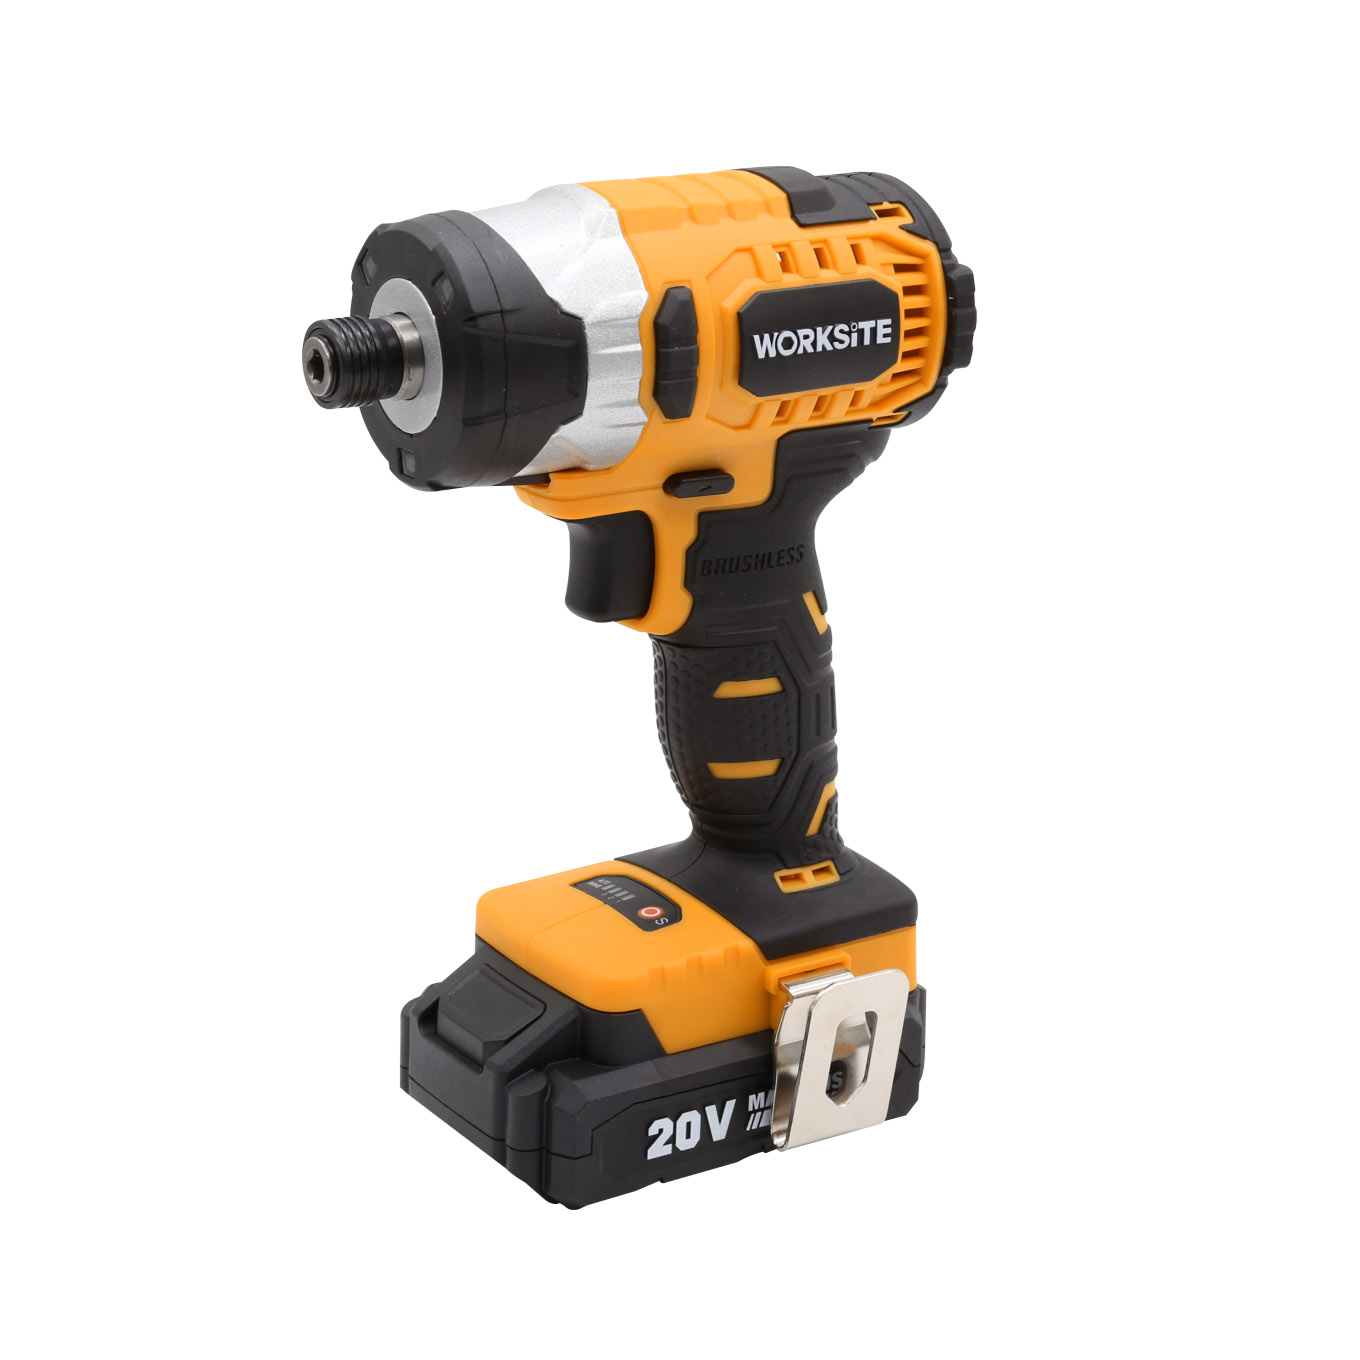 Worksite Brushless Cordless Impact Driver CIS320A